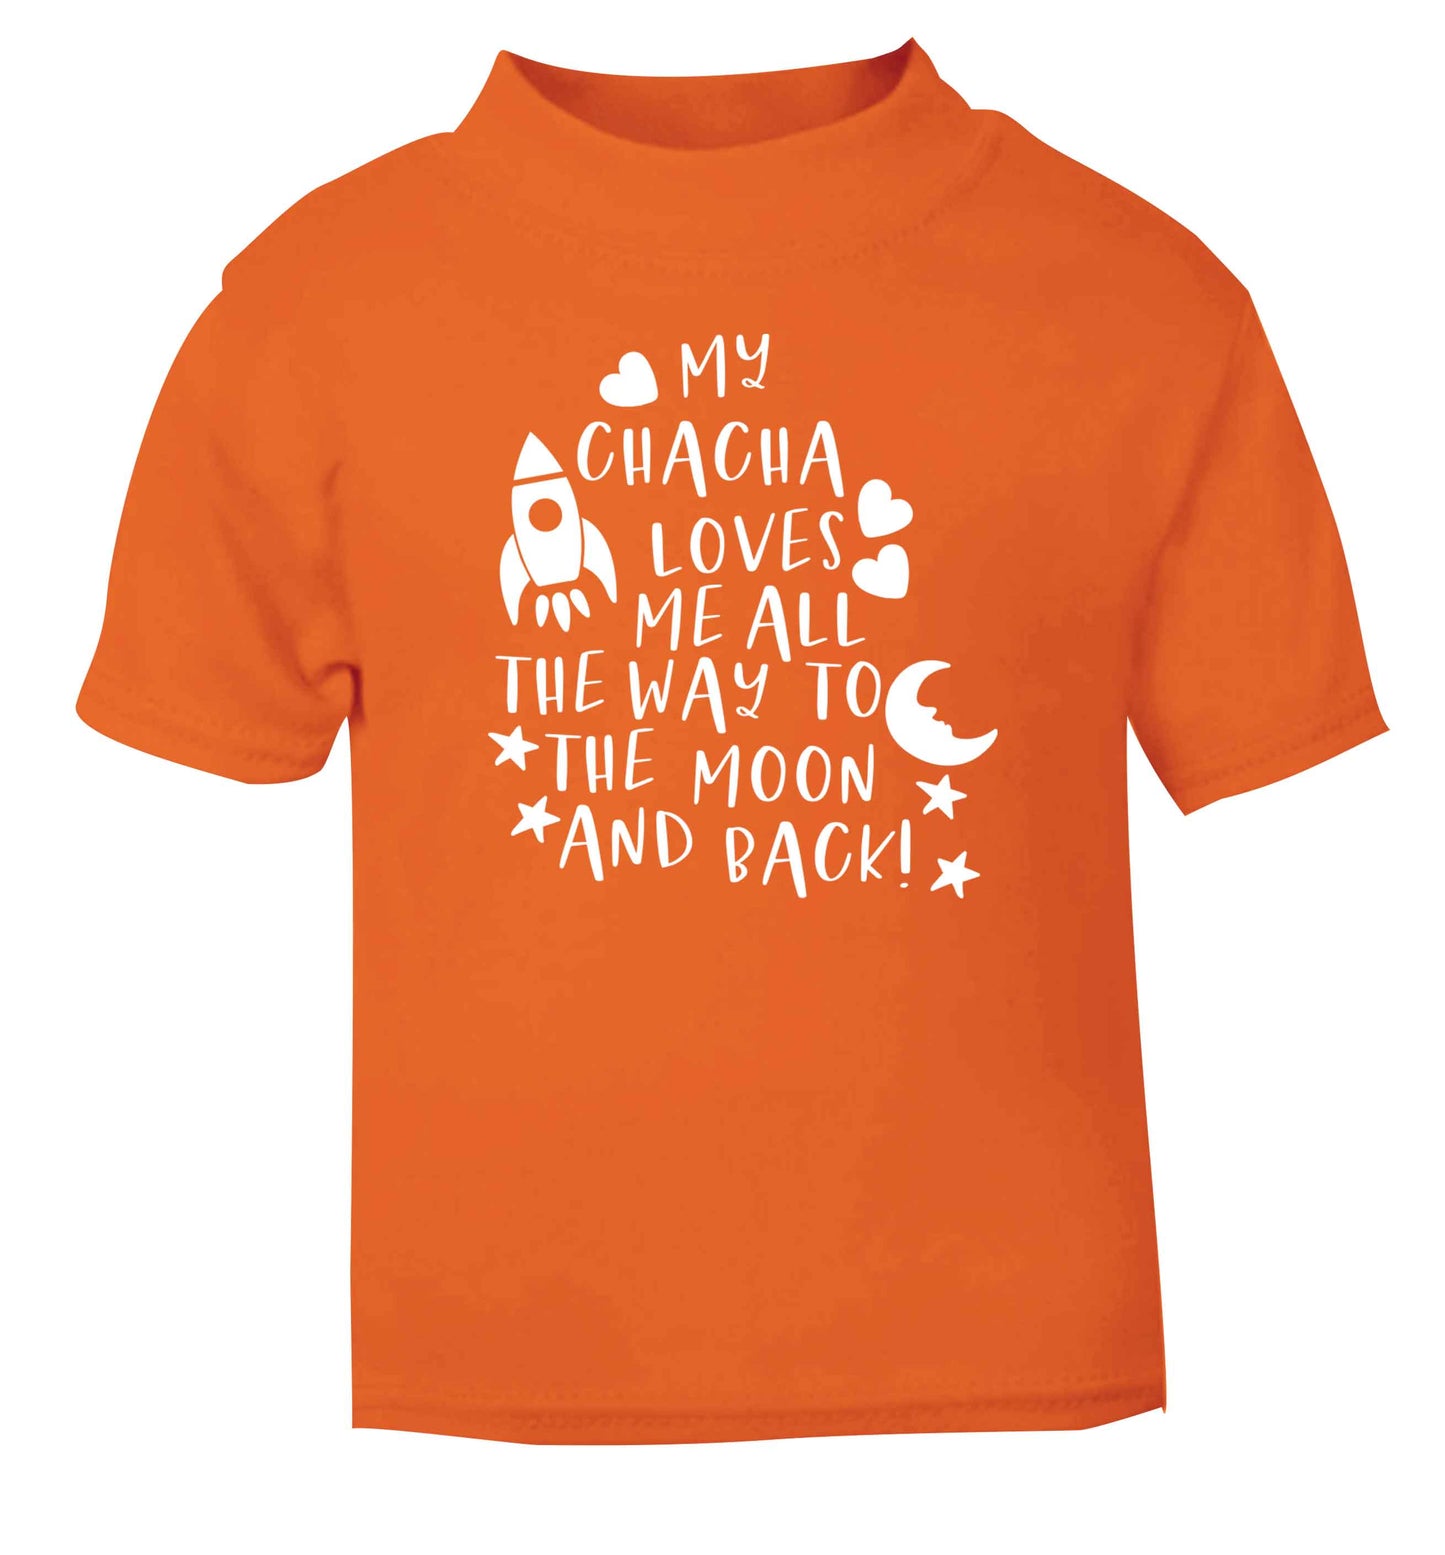 My chacha loves me all the way to the moon and back orange Baby Toddler Tshirt 2 Years